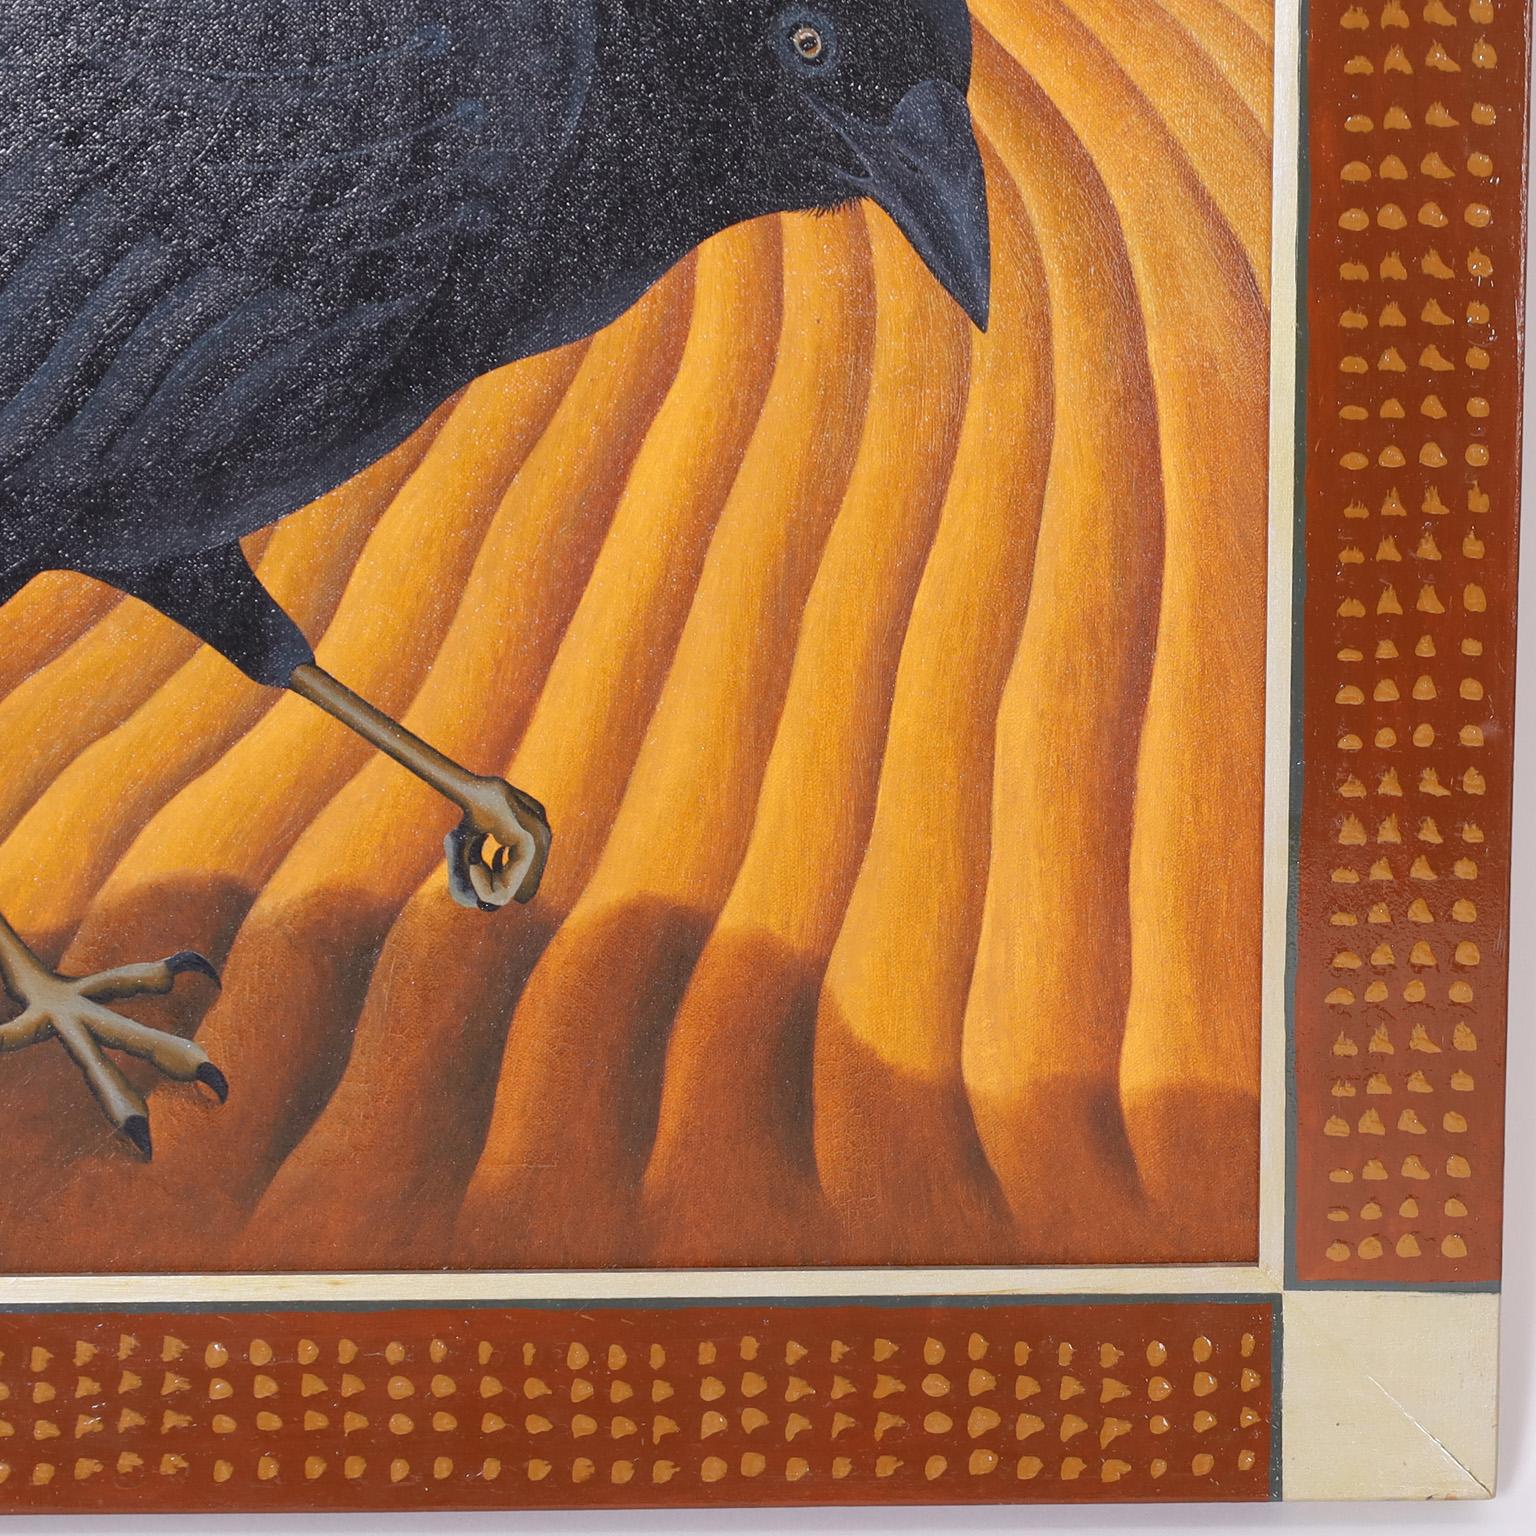 Striking acrylic painting on canvas of a crow with a familiar quizzical expression in a colorful baron landscape. Presented in a paint decorated wood frame and signed on the back Taylor 1990.